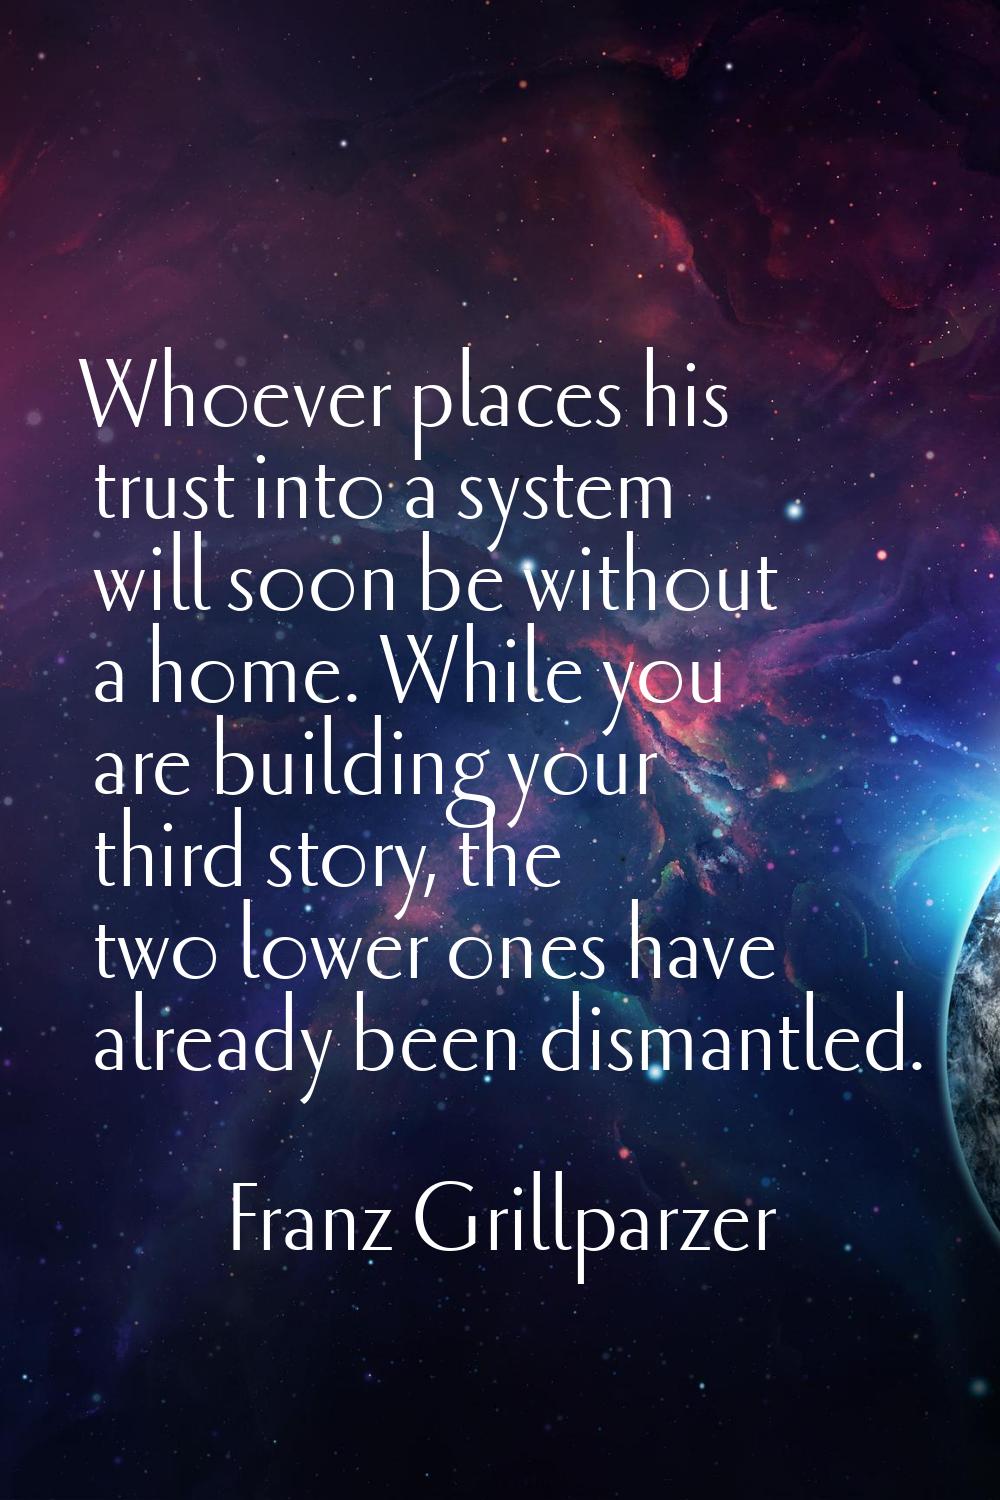 Whoever places his trust into a system will soon be without a home. While you are building your thi